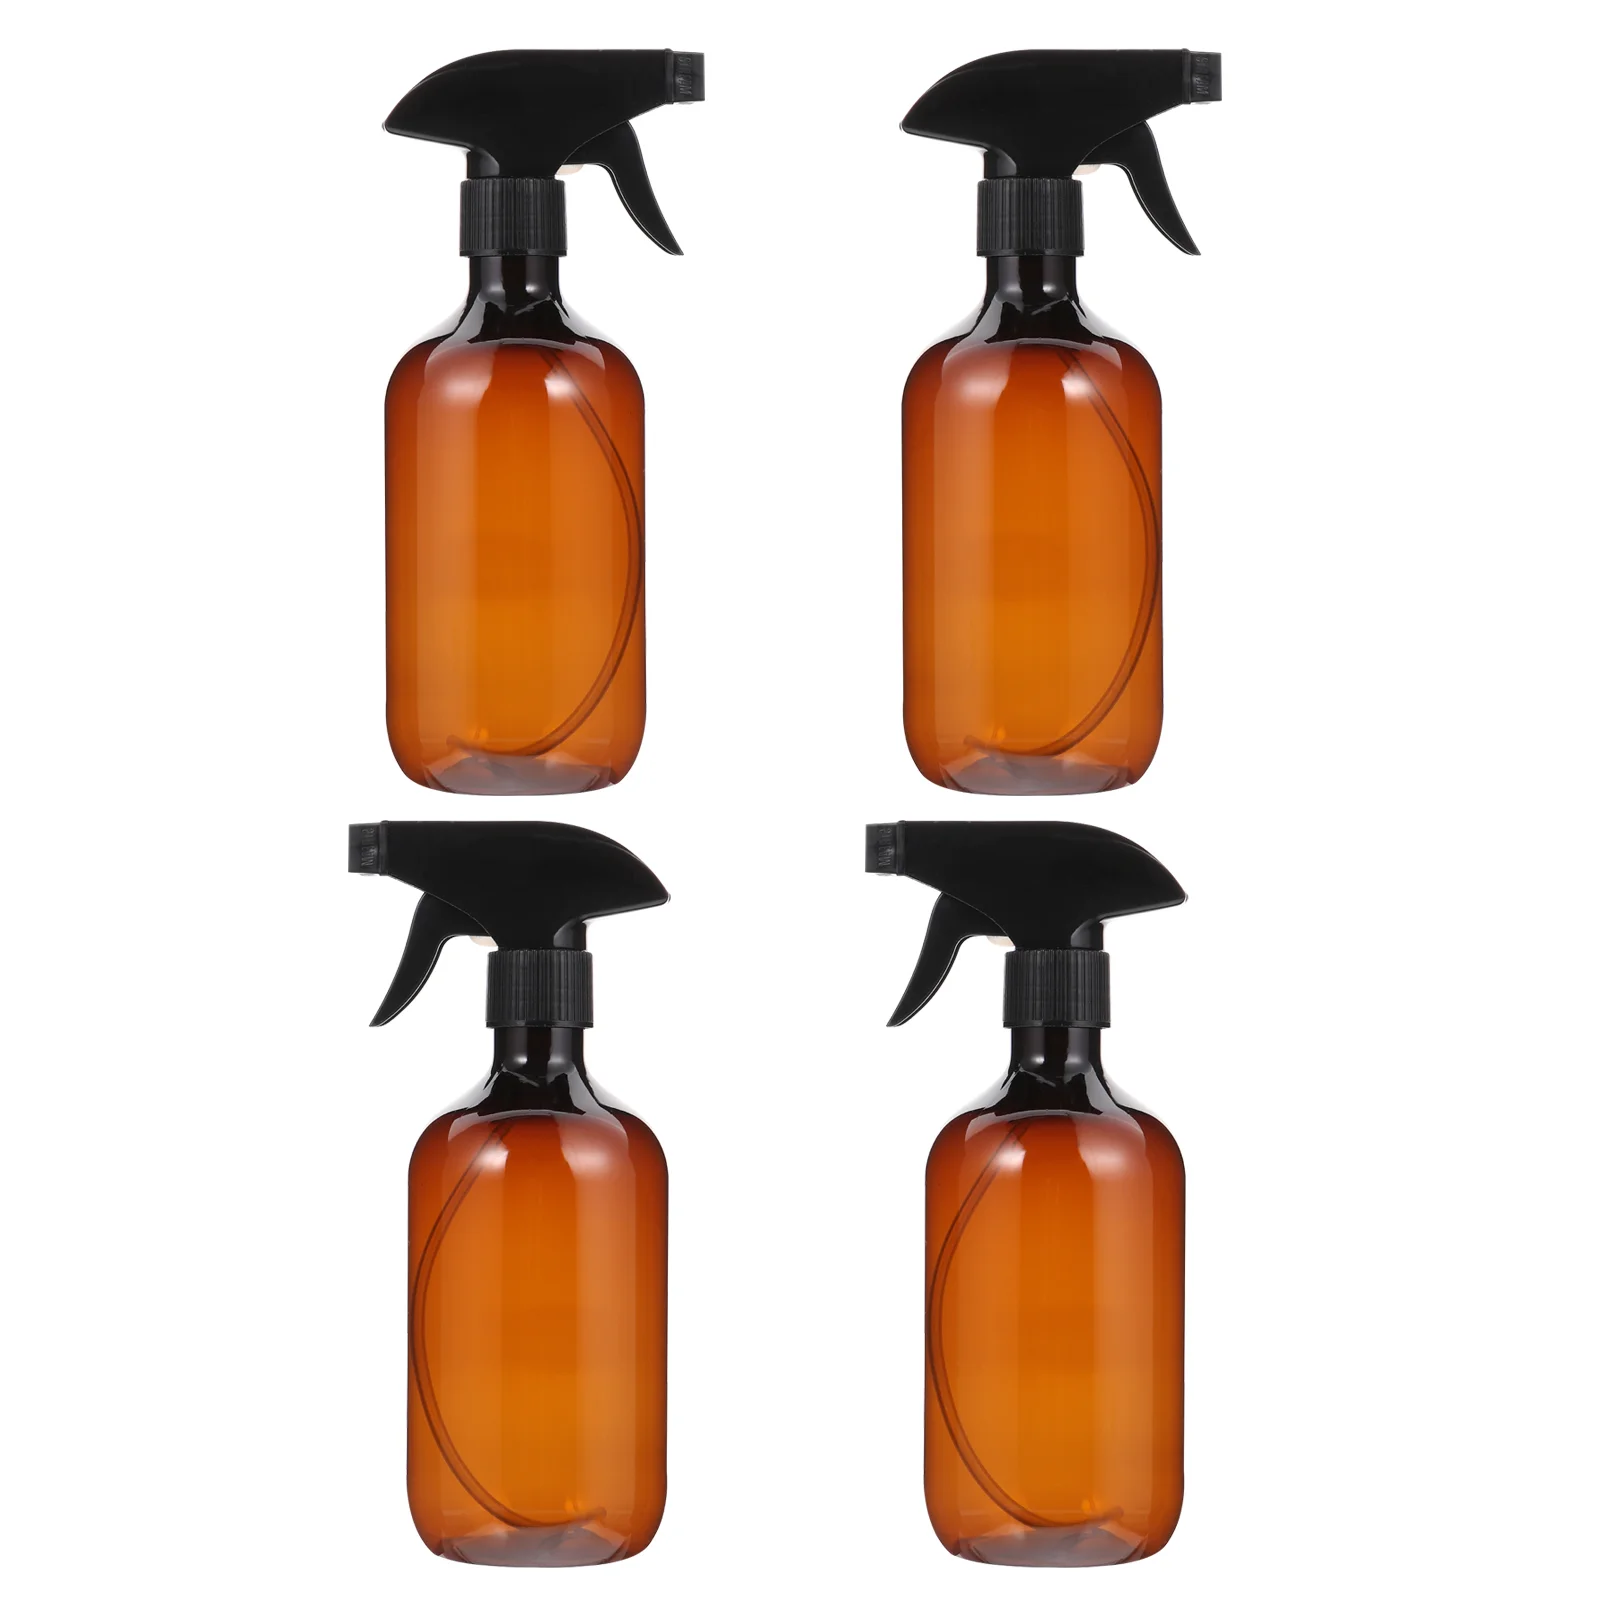 4pcs Empty Sprayer Bottle Hair Barber Sprayer 500ml Bottle Plastic Containers For Liquids Empty Plastic Bottles 5pcs empty spray bottles refillable cleaning spray bottles hair spray bottle for essential oil water cleaning products 500ml